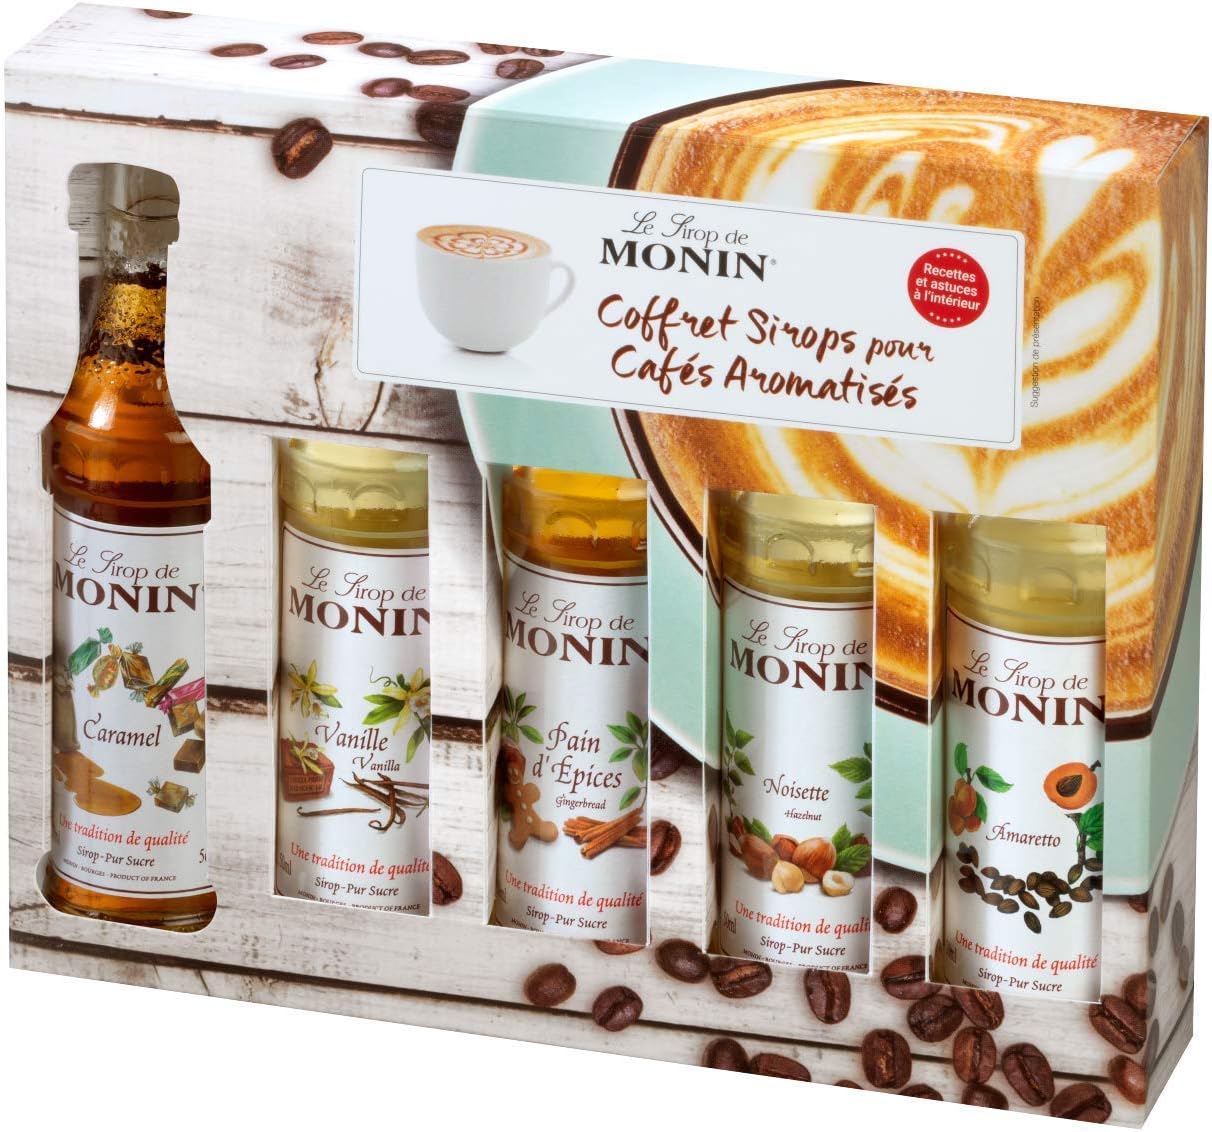 MONIN Coffee Syrup Gift Set 5x5cl. 1x Vanilla, 1x Caramel, 1x Hazelnut, 1x Amaretto, 1x Gingerbread Syrup for Coffee. Perfect for Flavoured Coffees